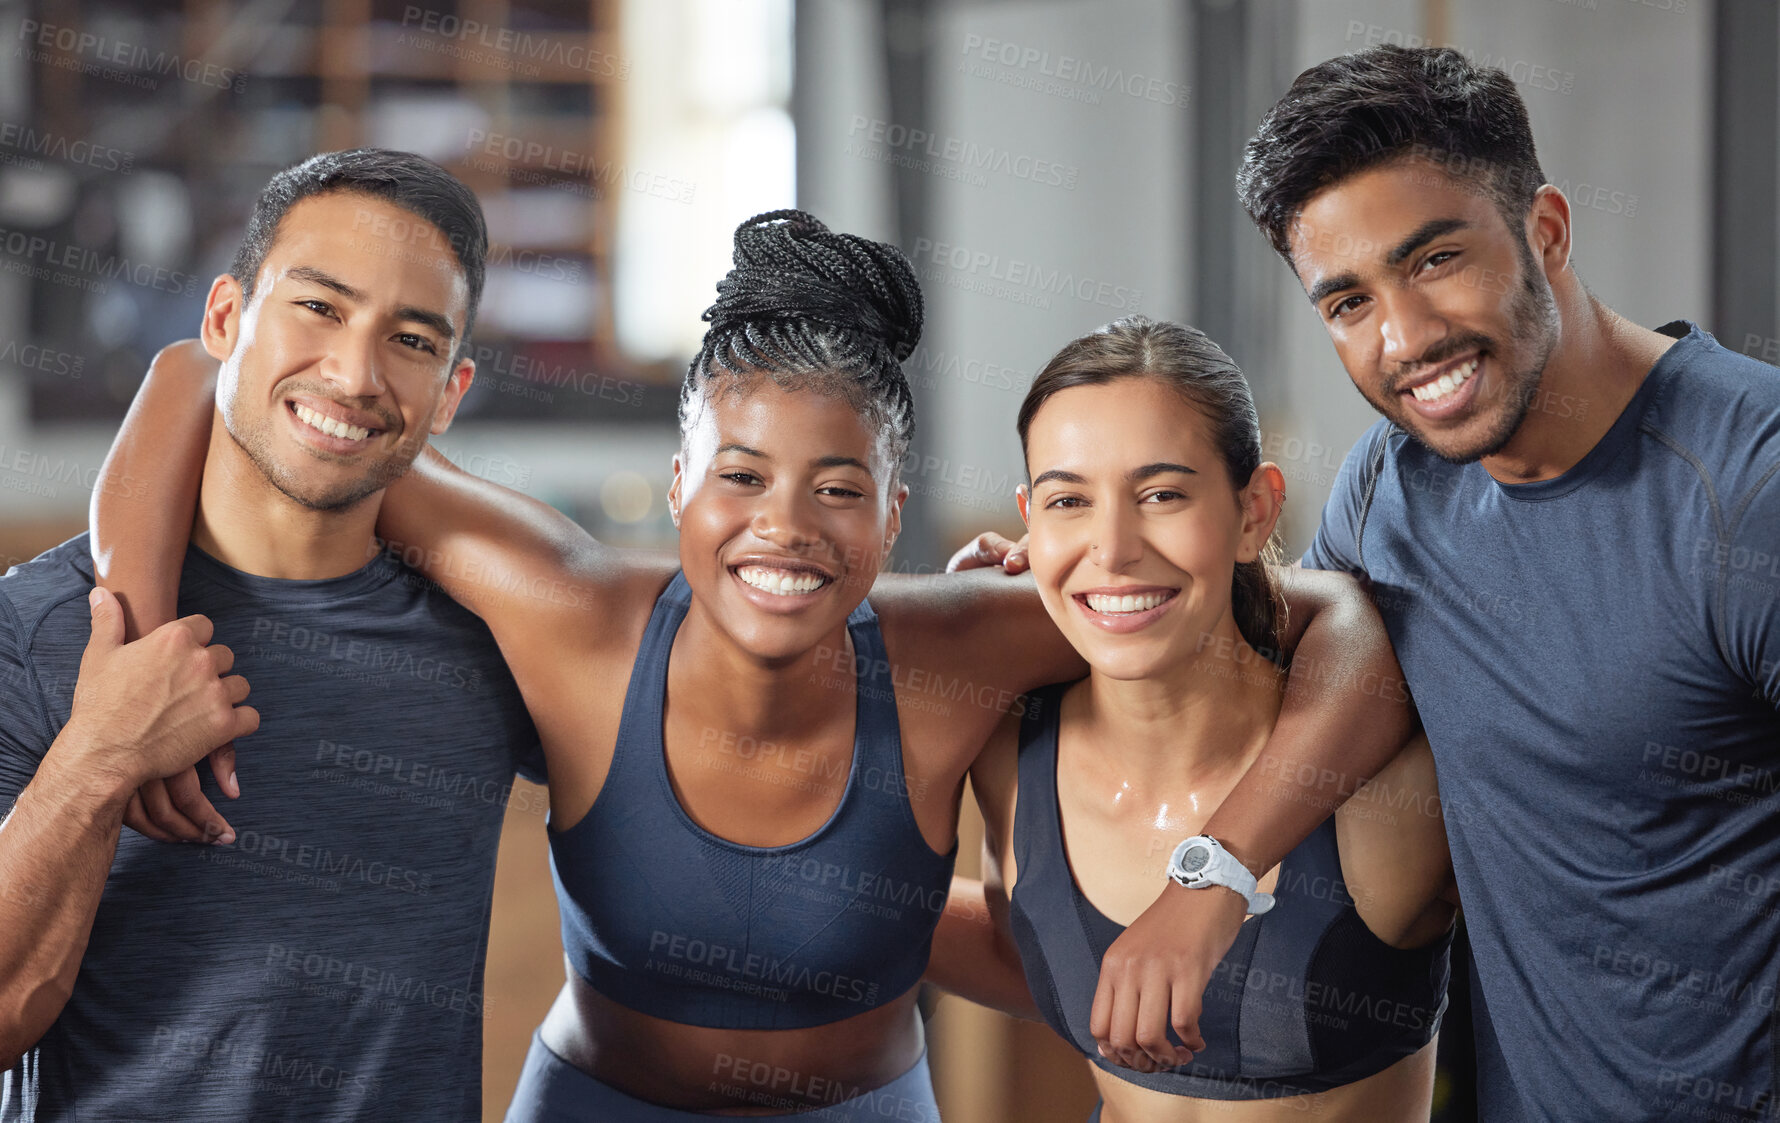 Buy stock photo Fitness, workout group, team or people in a happy portrait for good training exercise or gym class session. Diverse sports friends, man and woman face together for health, wellness and body strength